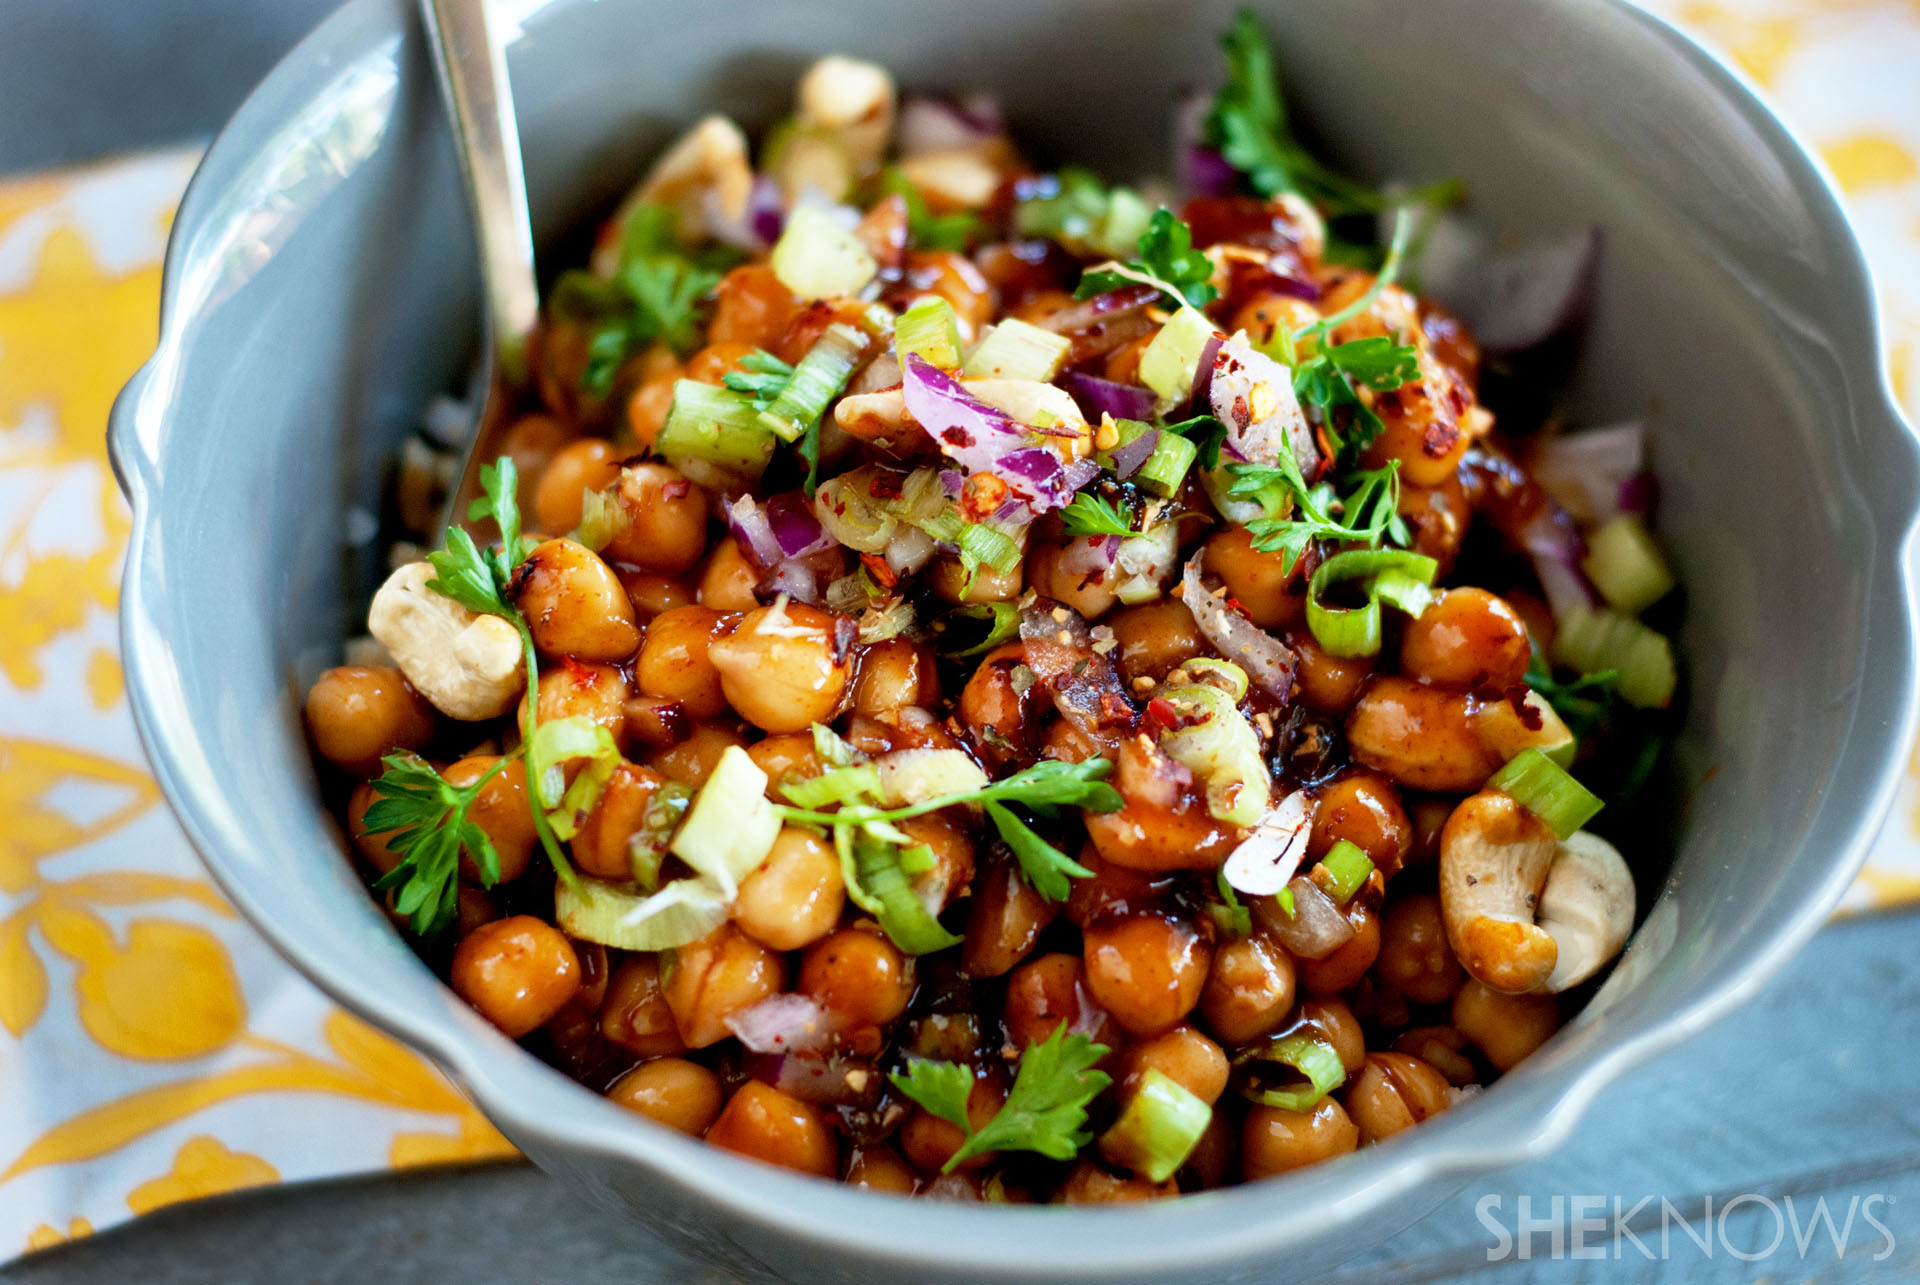 Vegan Chinese Recipes Kung pao chickpeas Turn a favorite Chinese takeout dish vegan